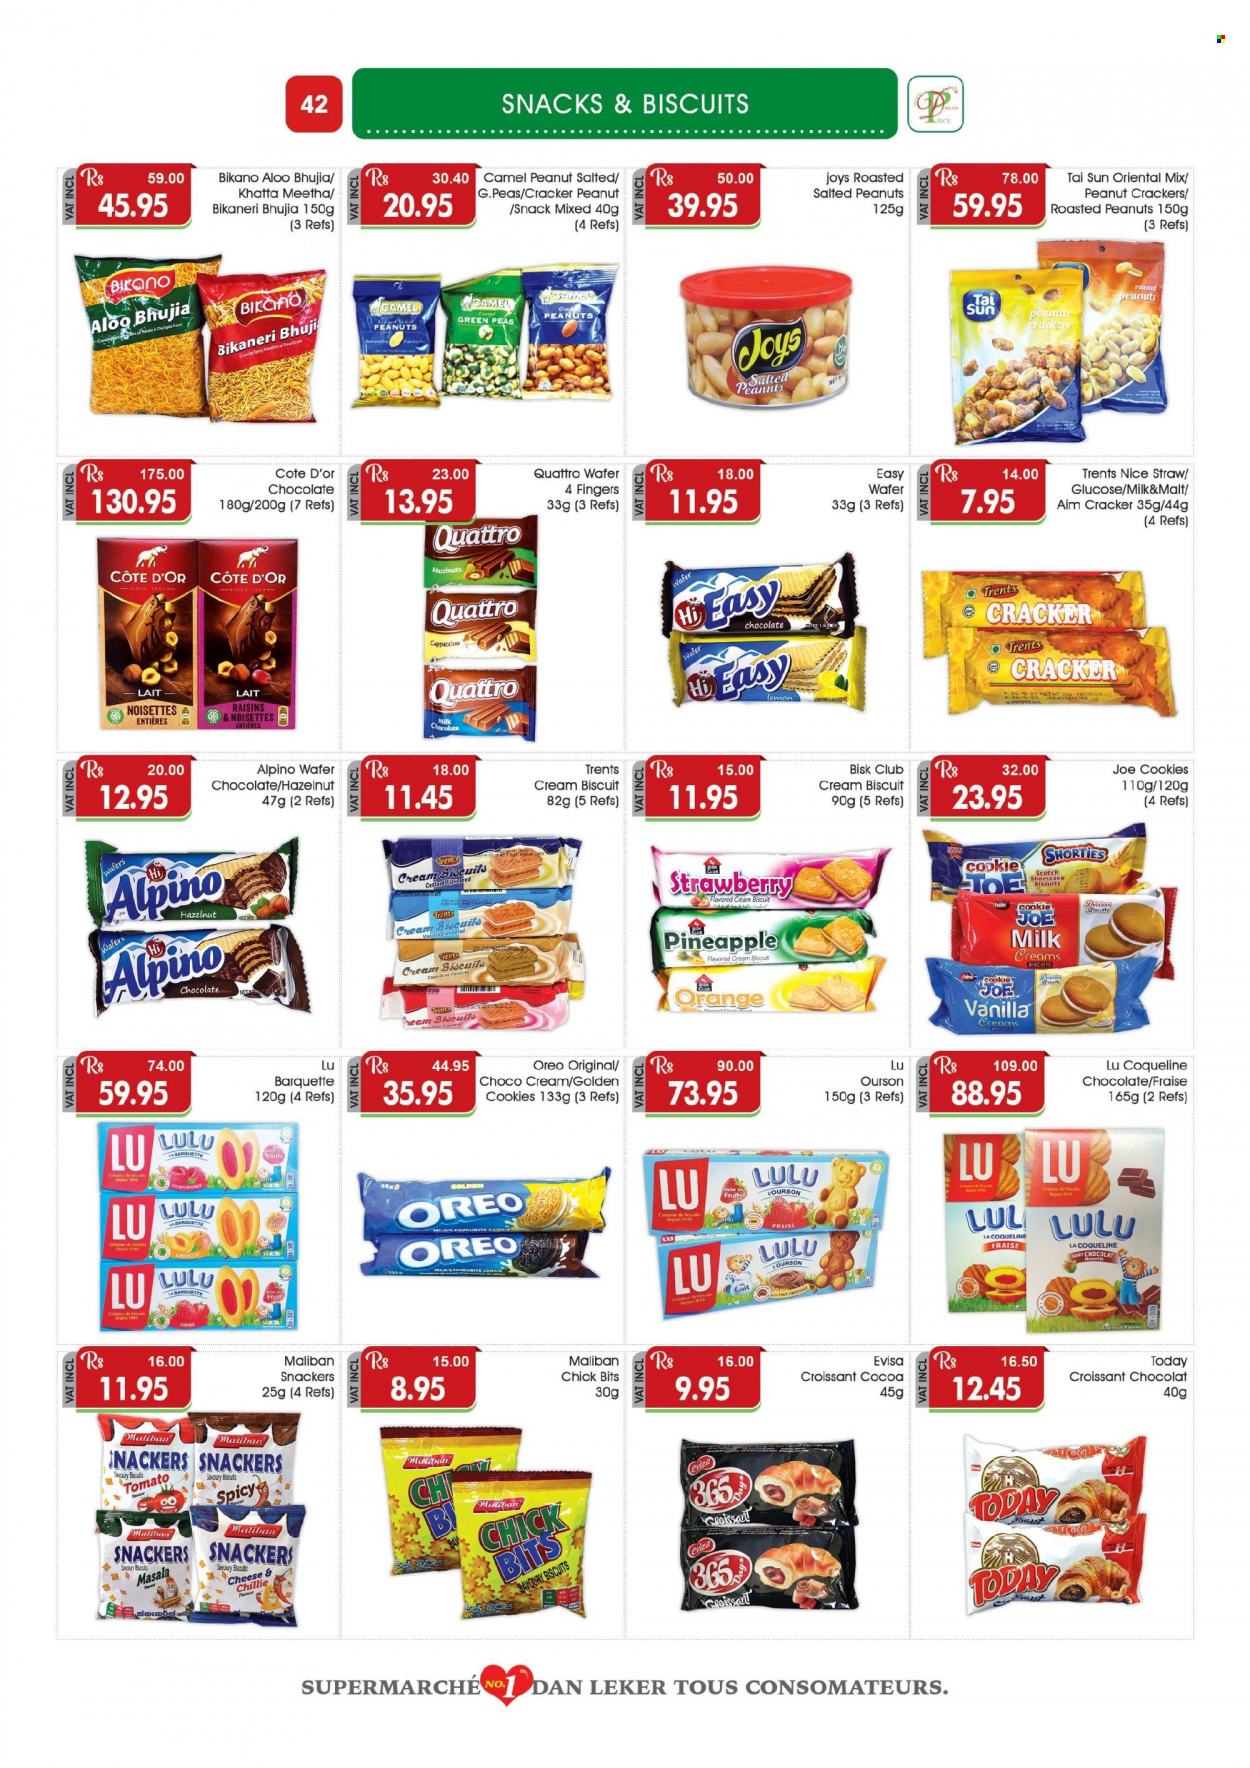 thumbnail - Dreamprice Catalogue - 21.11.2022 - 11.12.2022 - Sales products - croissant, peas, pineapple, oranges, noodles, custard, cookies, milk chocolate, wafers, chocolate, snack, crackers, biscuit, cocoa, malt, bhujia, roasted peanuts, hazelnuts, peanuts, dried fruit, Tai Sun, Camel, cappuccino, straw, raisins, Oreo. Page 42.